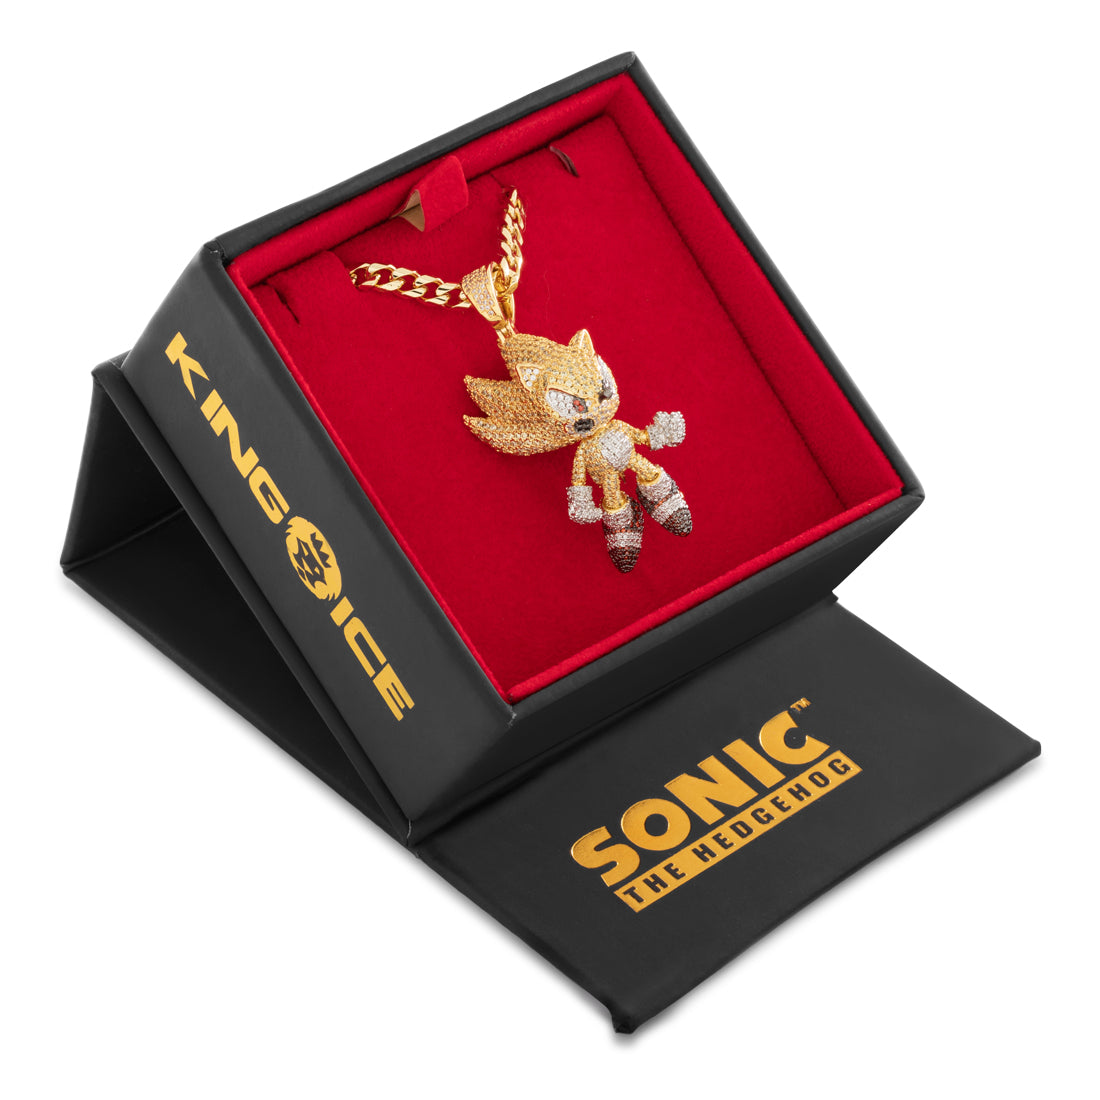 White Gold / 2.3" Sonic the Hedgehog x King Ice - Fast Super Sonic Necklace